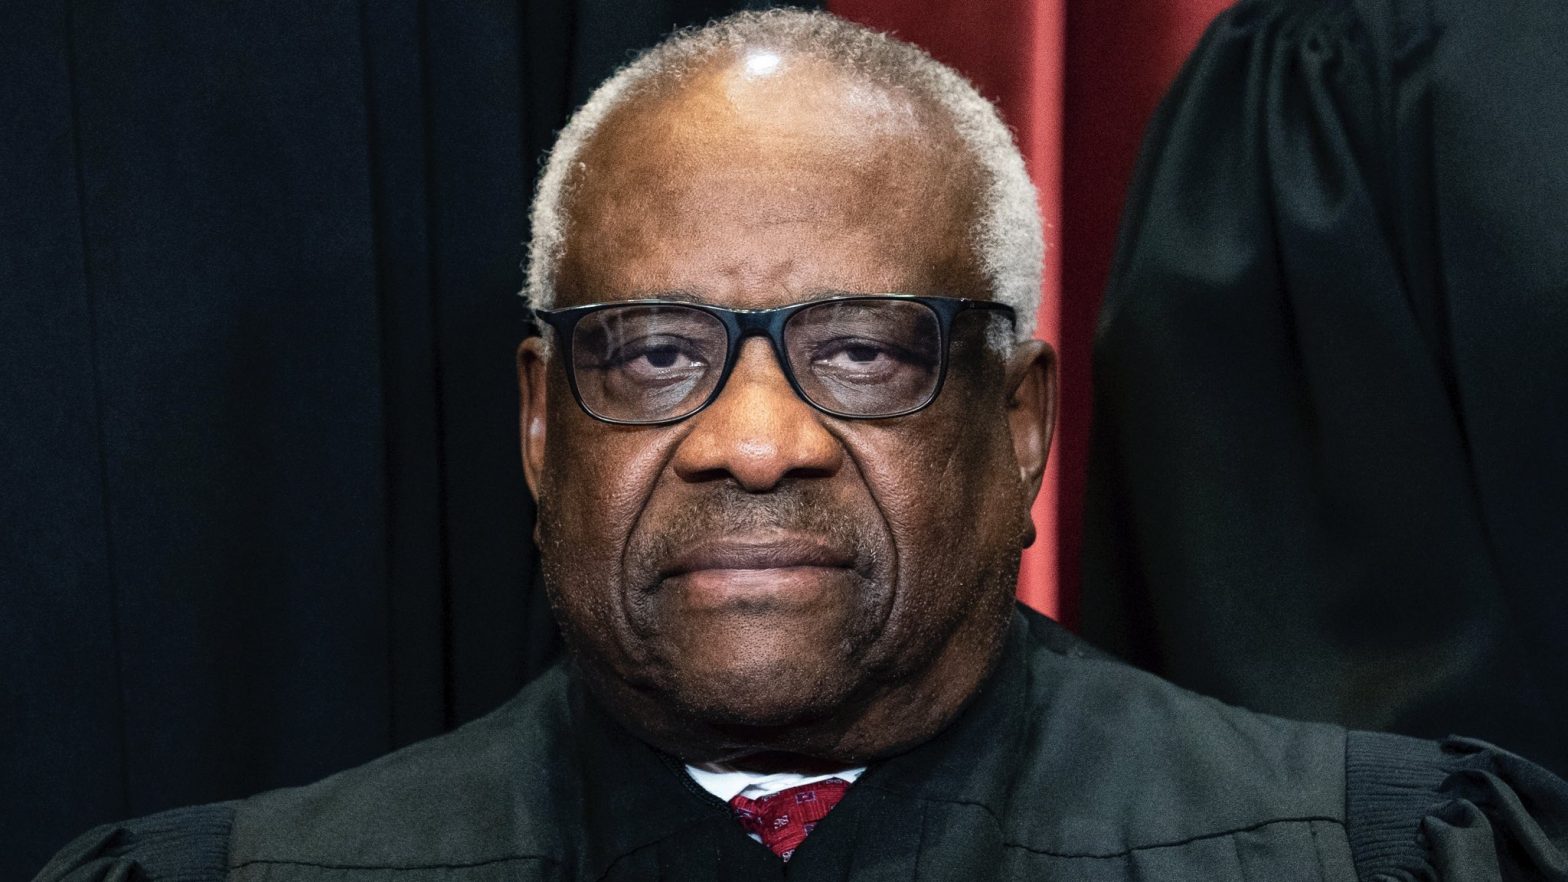 From yacht trip around the Bahamas to stay at luxury resort in Jamaica: Justice Clarence Thomas accepted trips worth millions since 1991: Report